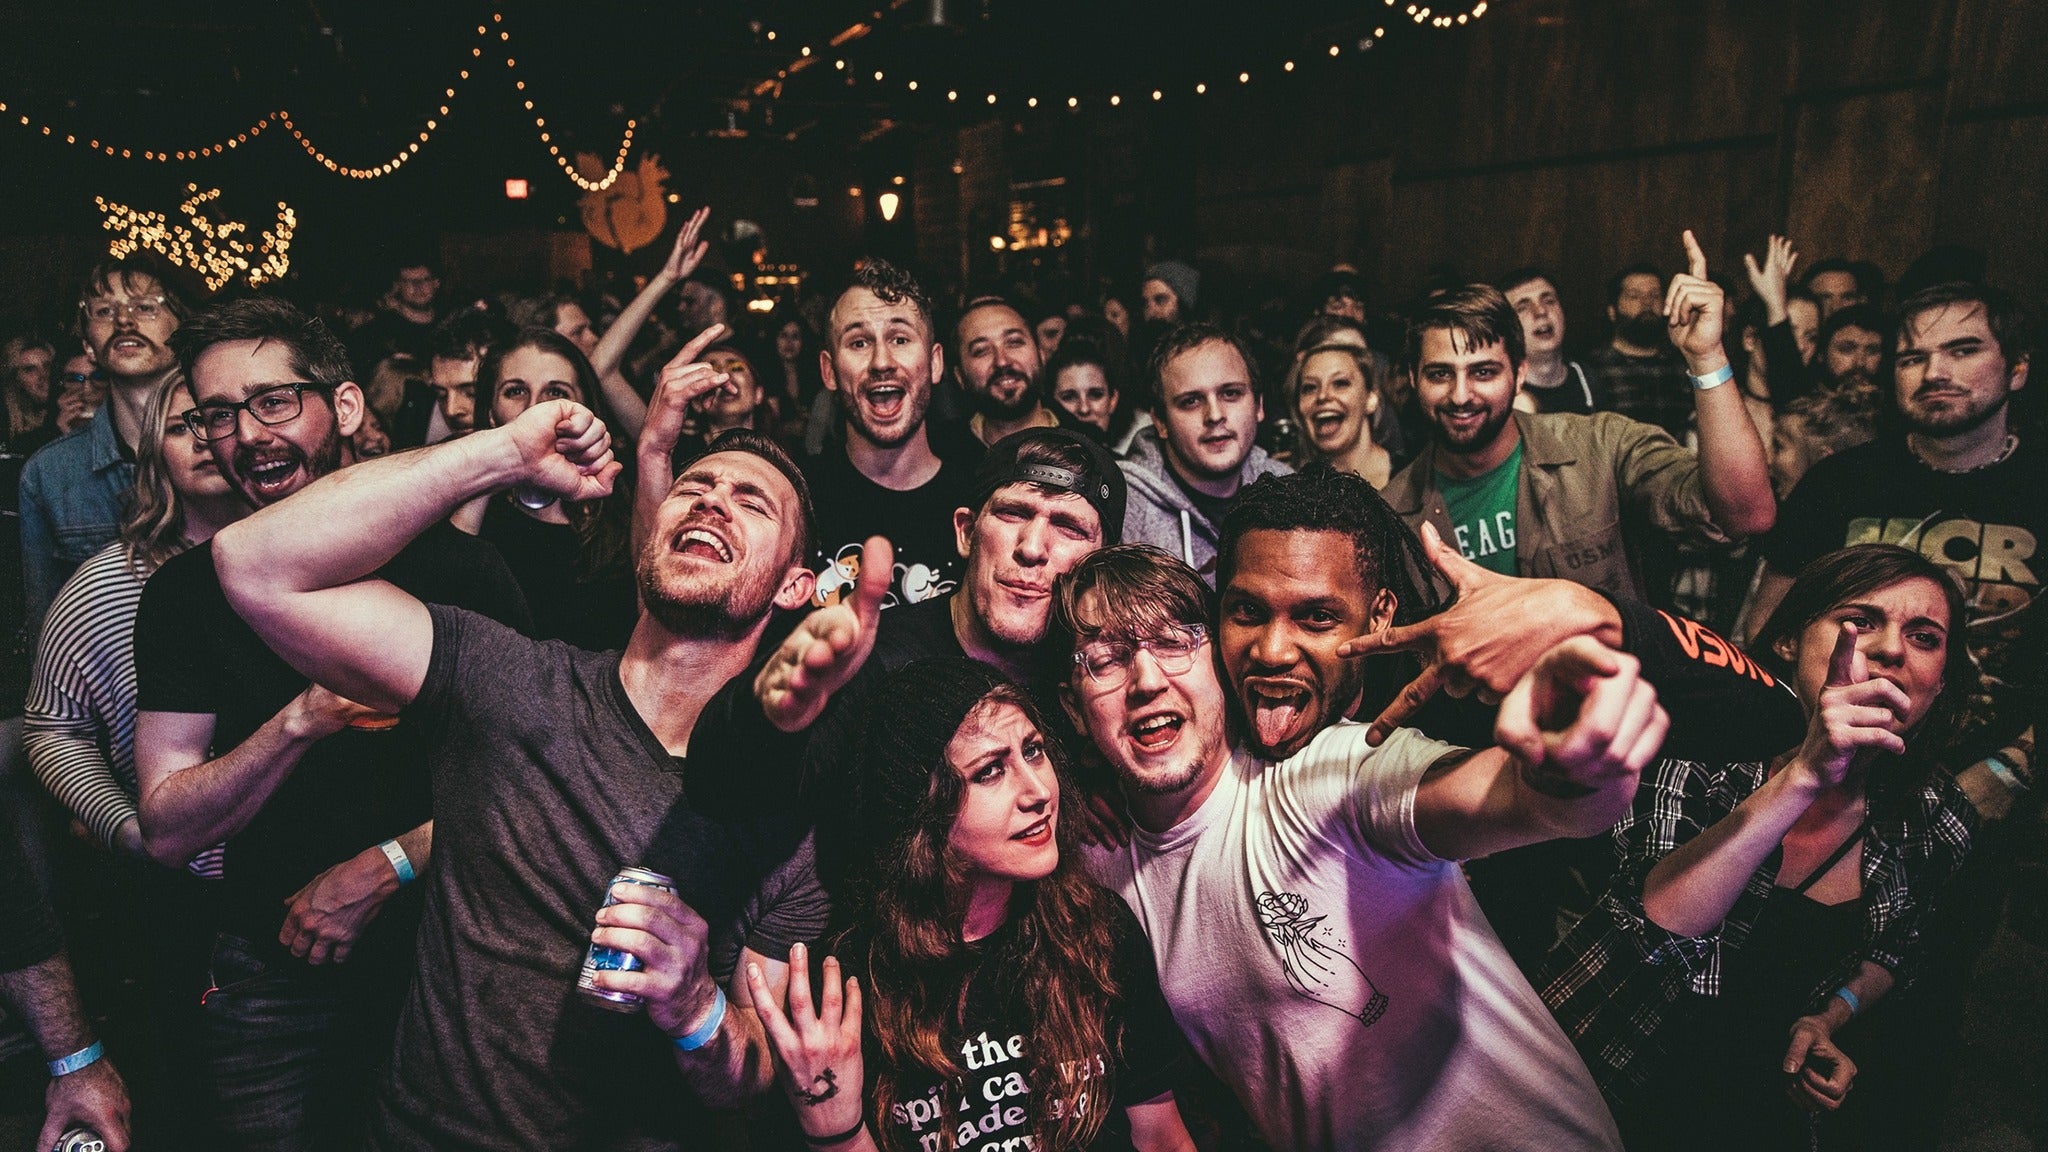 THE EMO BAND: Emo + Pop Punk Live Band Karaoke Party (21+) in Pittsburgh promo photo for Artist presale offer code